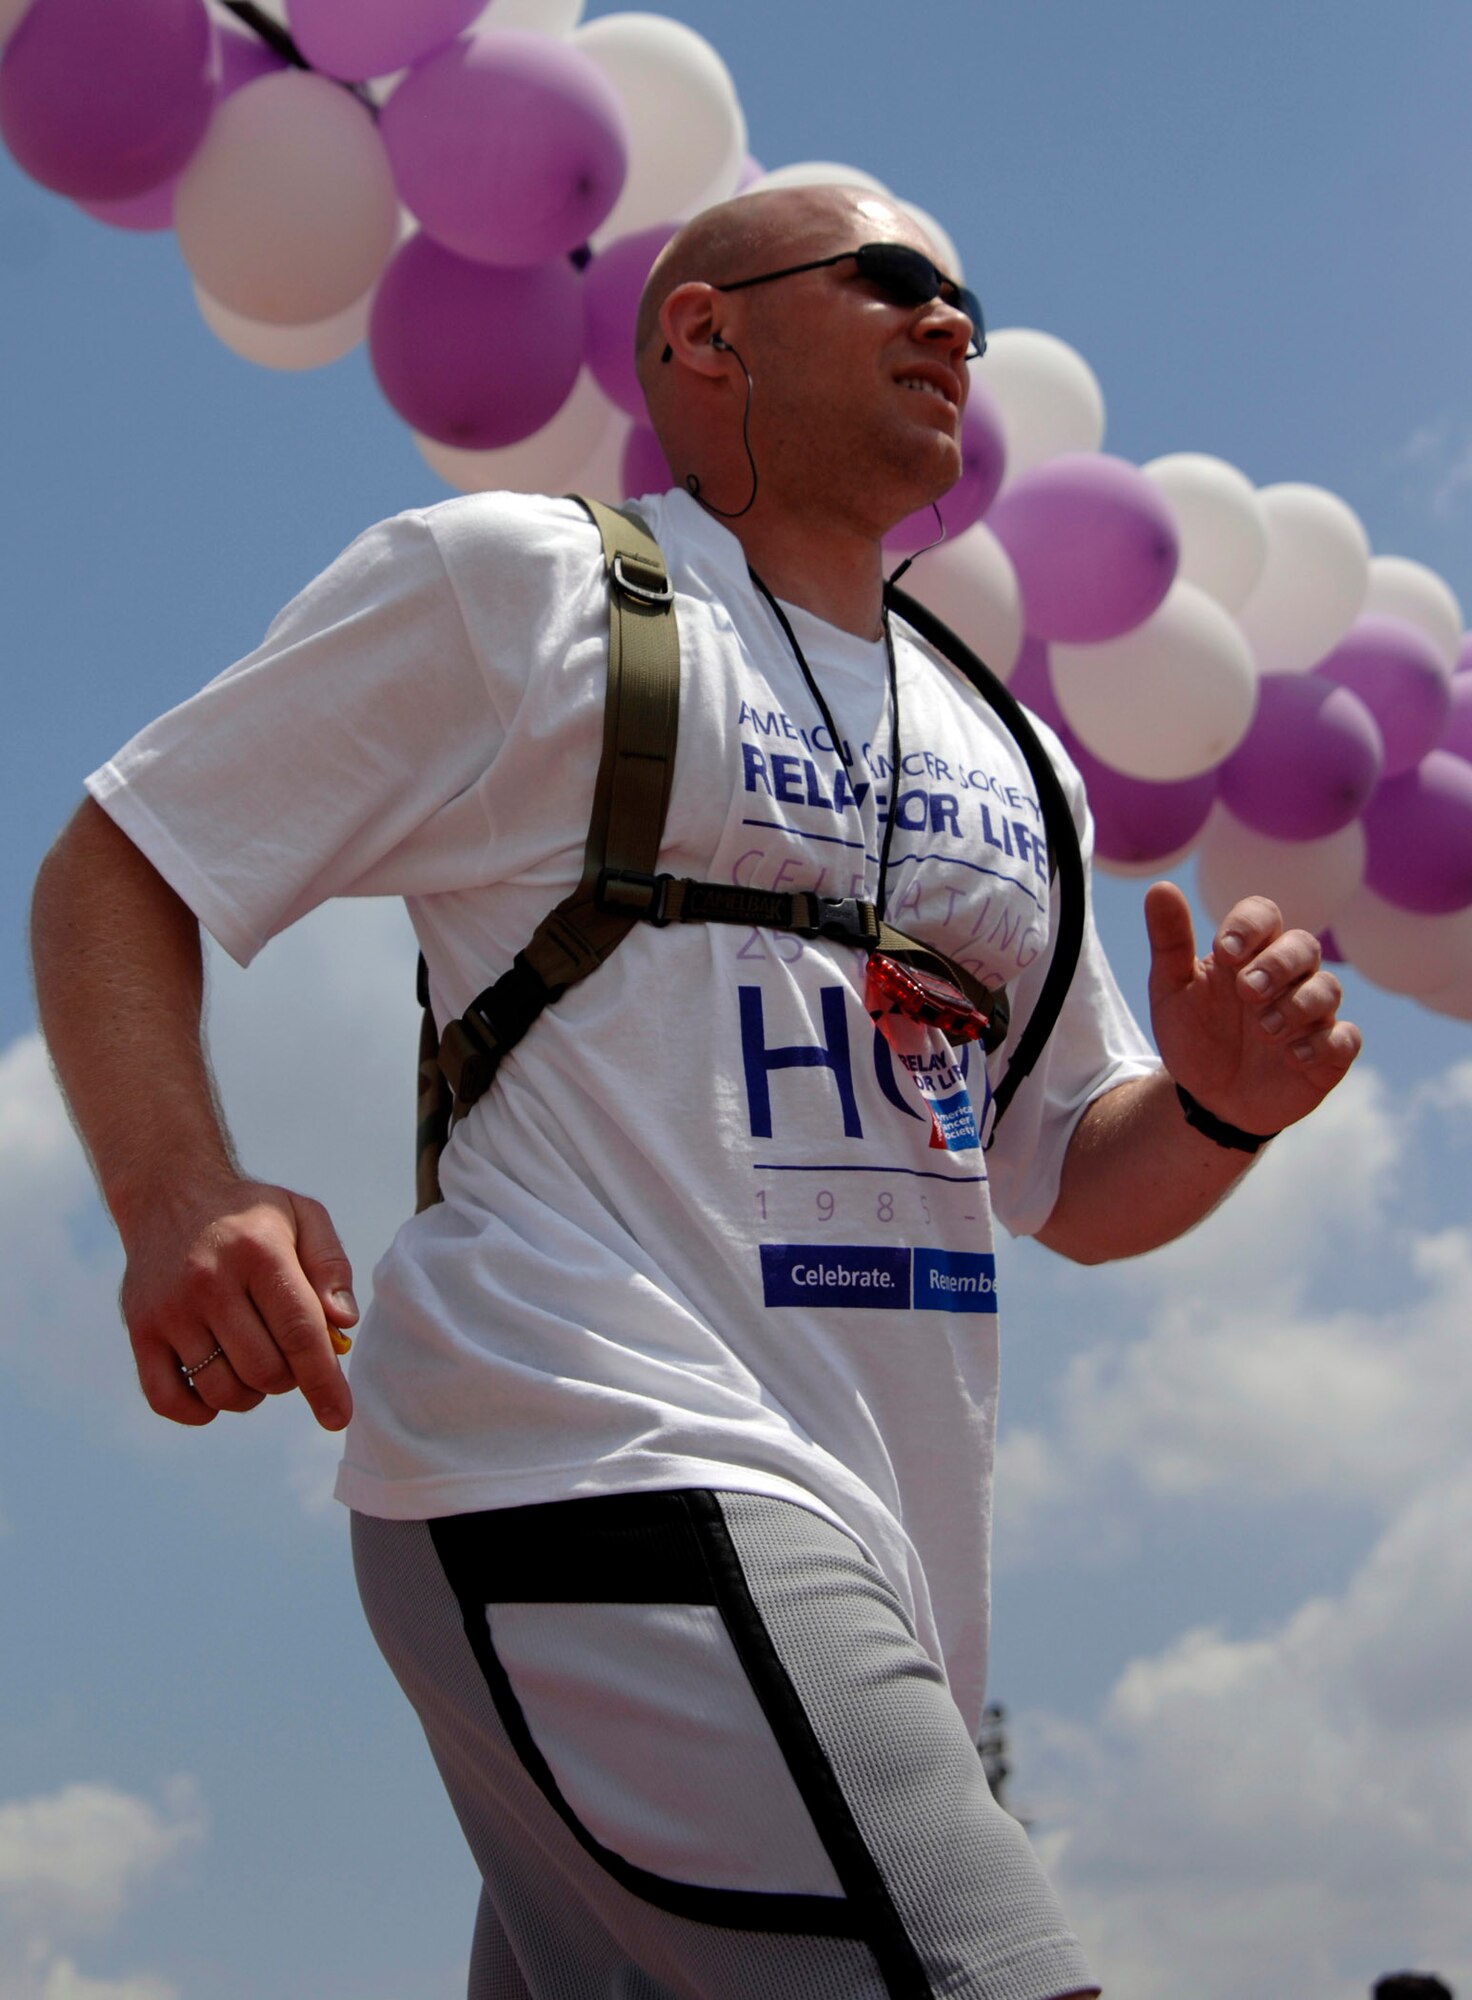 Staff Sgt. Joseph Gibbon, 39th Air Base Wing chapel, crosses the check point during the Relay for Life at the Incirlik running track, May 9, 2009. The 2009 Relay for Life was the first relay available to members of the Incirlik community and hosted more than 300 participants from 20 teams, raising more than $9,500. The event lasted 12 hours and included a luminaria ceremony in which participants wrote the names of cancer survivors and victims on more than 100 luminary bags. (U.S. Air Force photo/Senior Airman Benjamin Wilson)